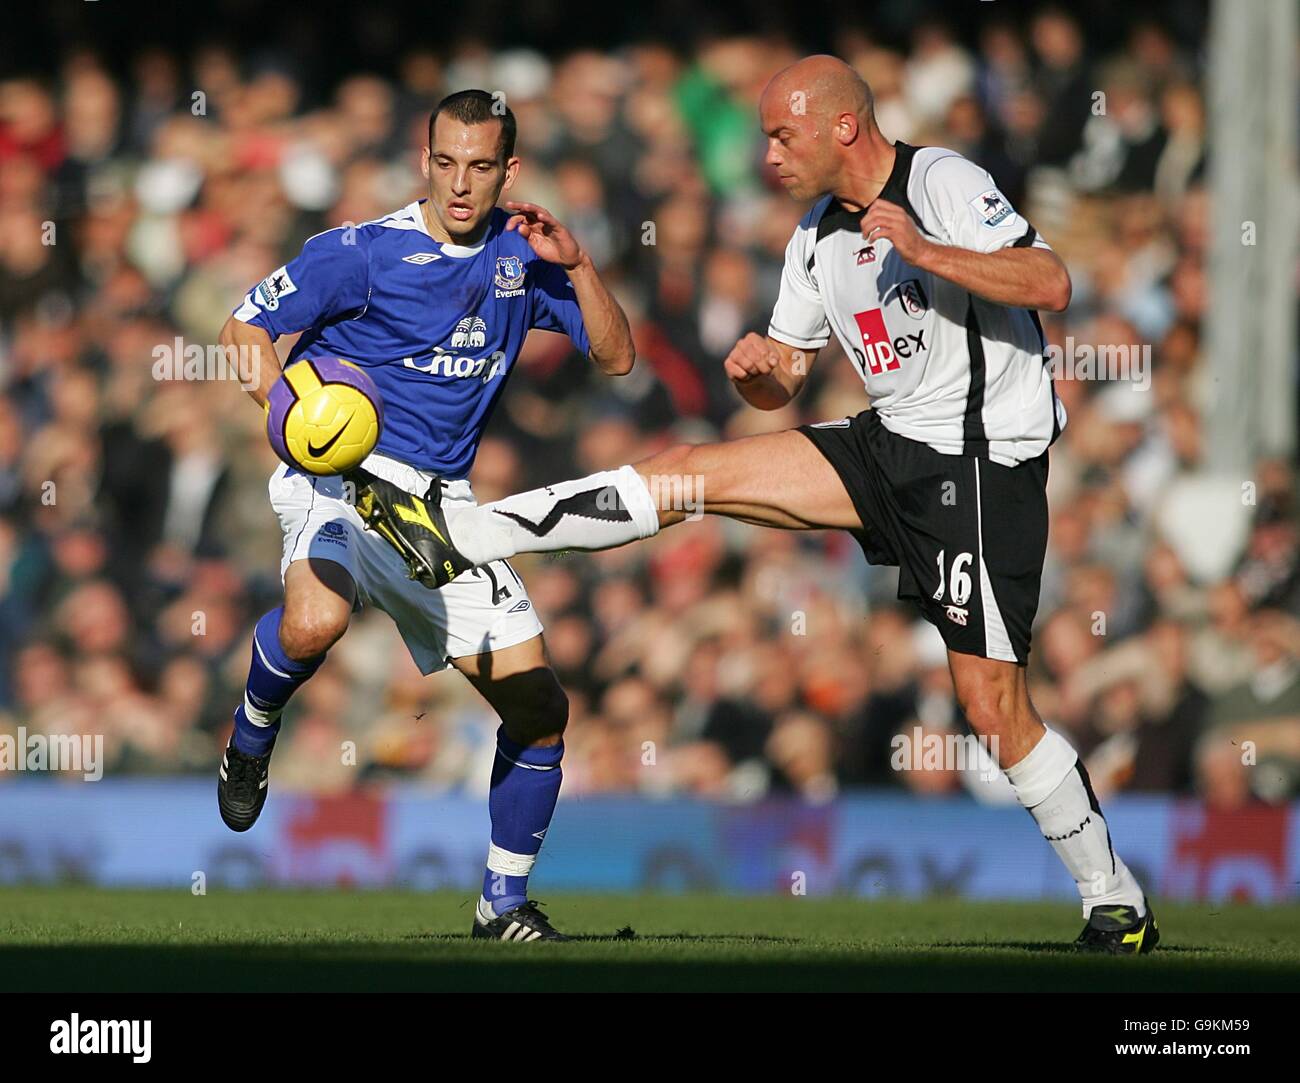 Soccer - FA Barclays Premiership - Fulham v Everton - Craven Cottage. Everton's Leon Osman and Fulham's Claus Jensen battle for the ball Stock Photo